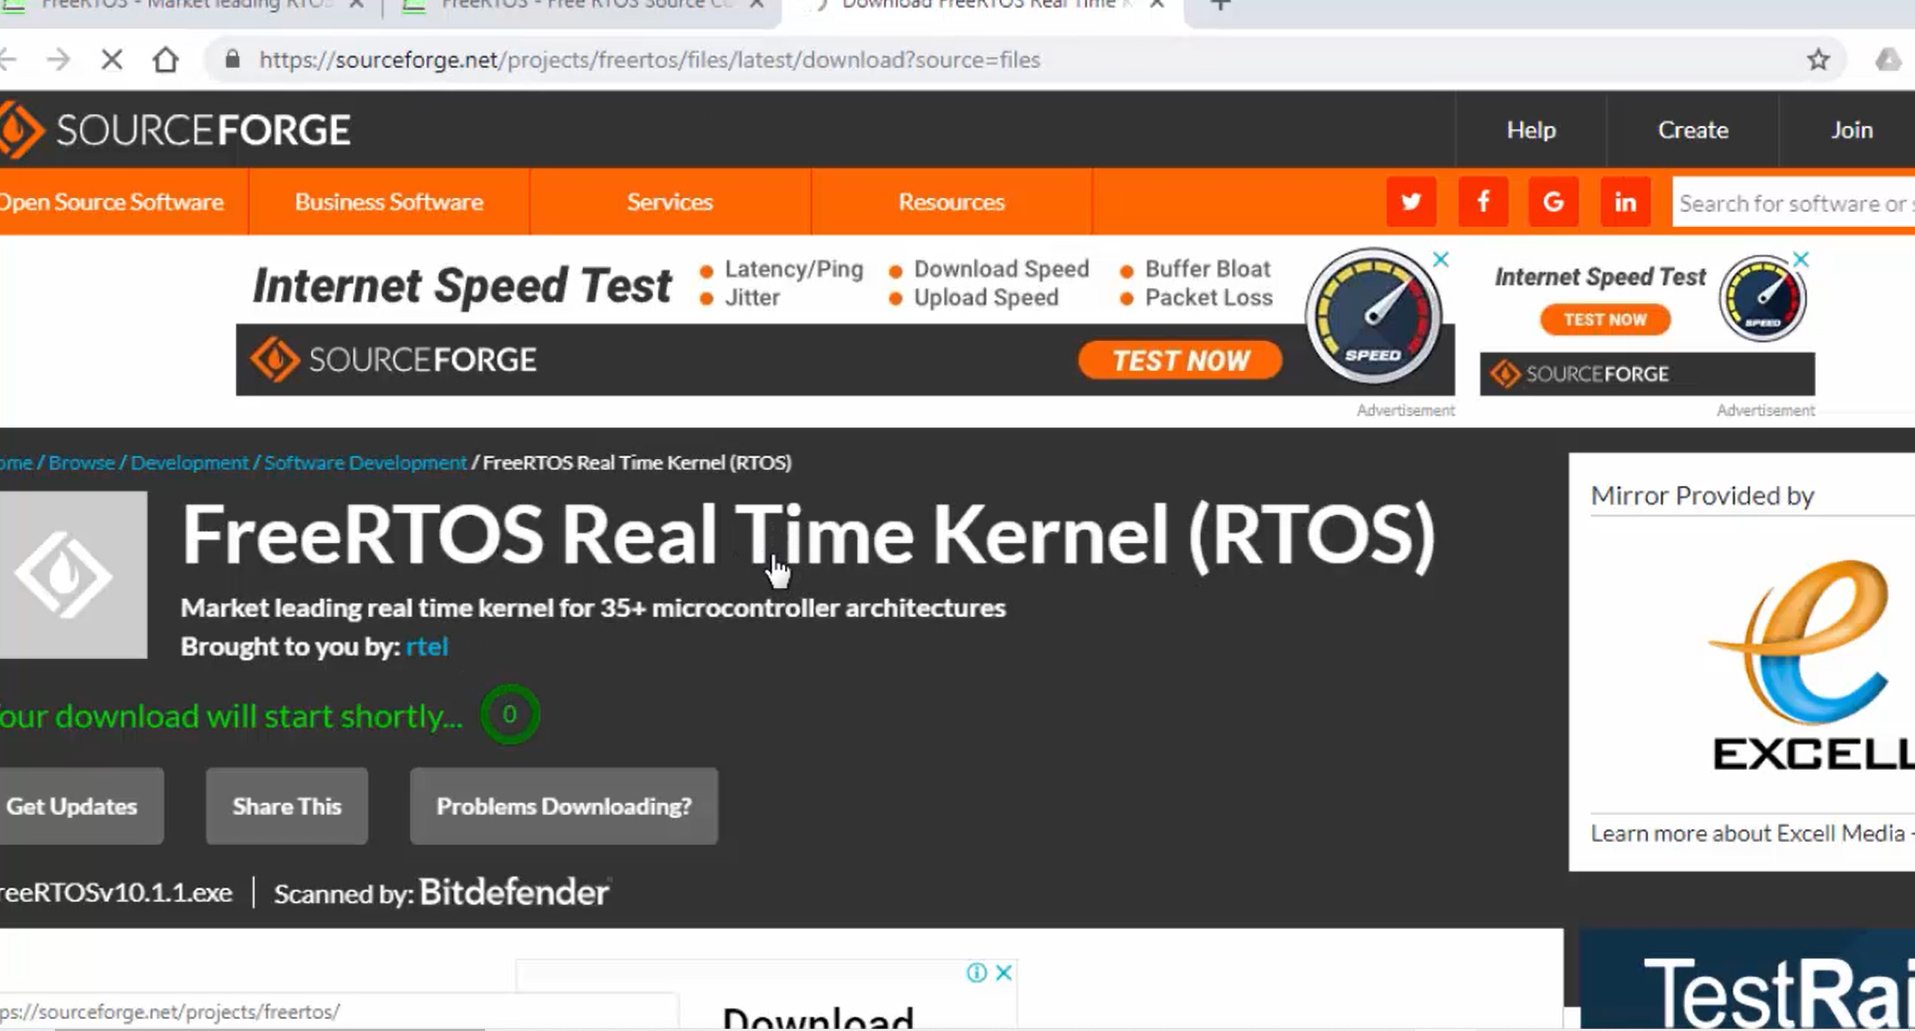 RTOS real-time kernel page